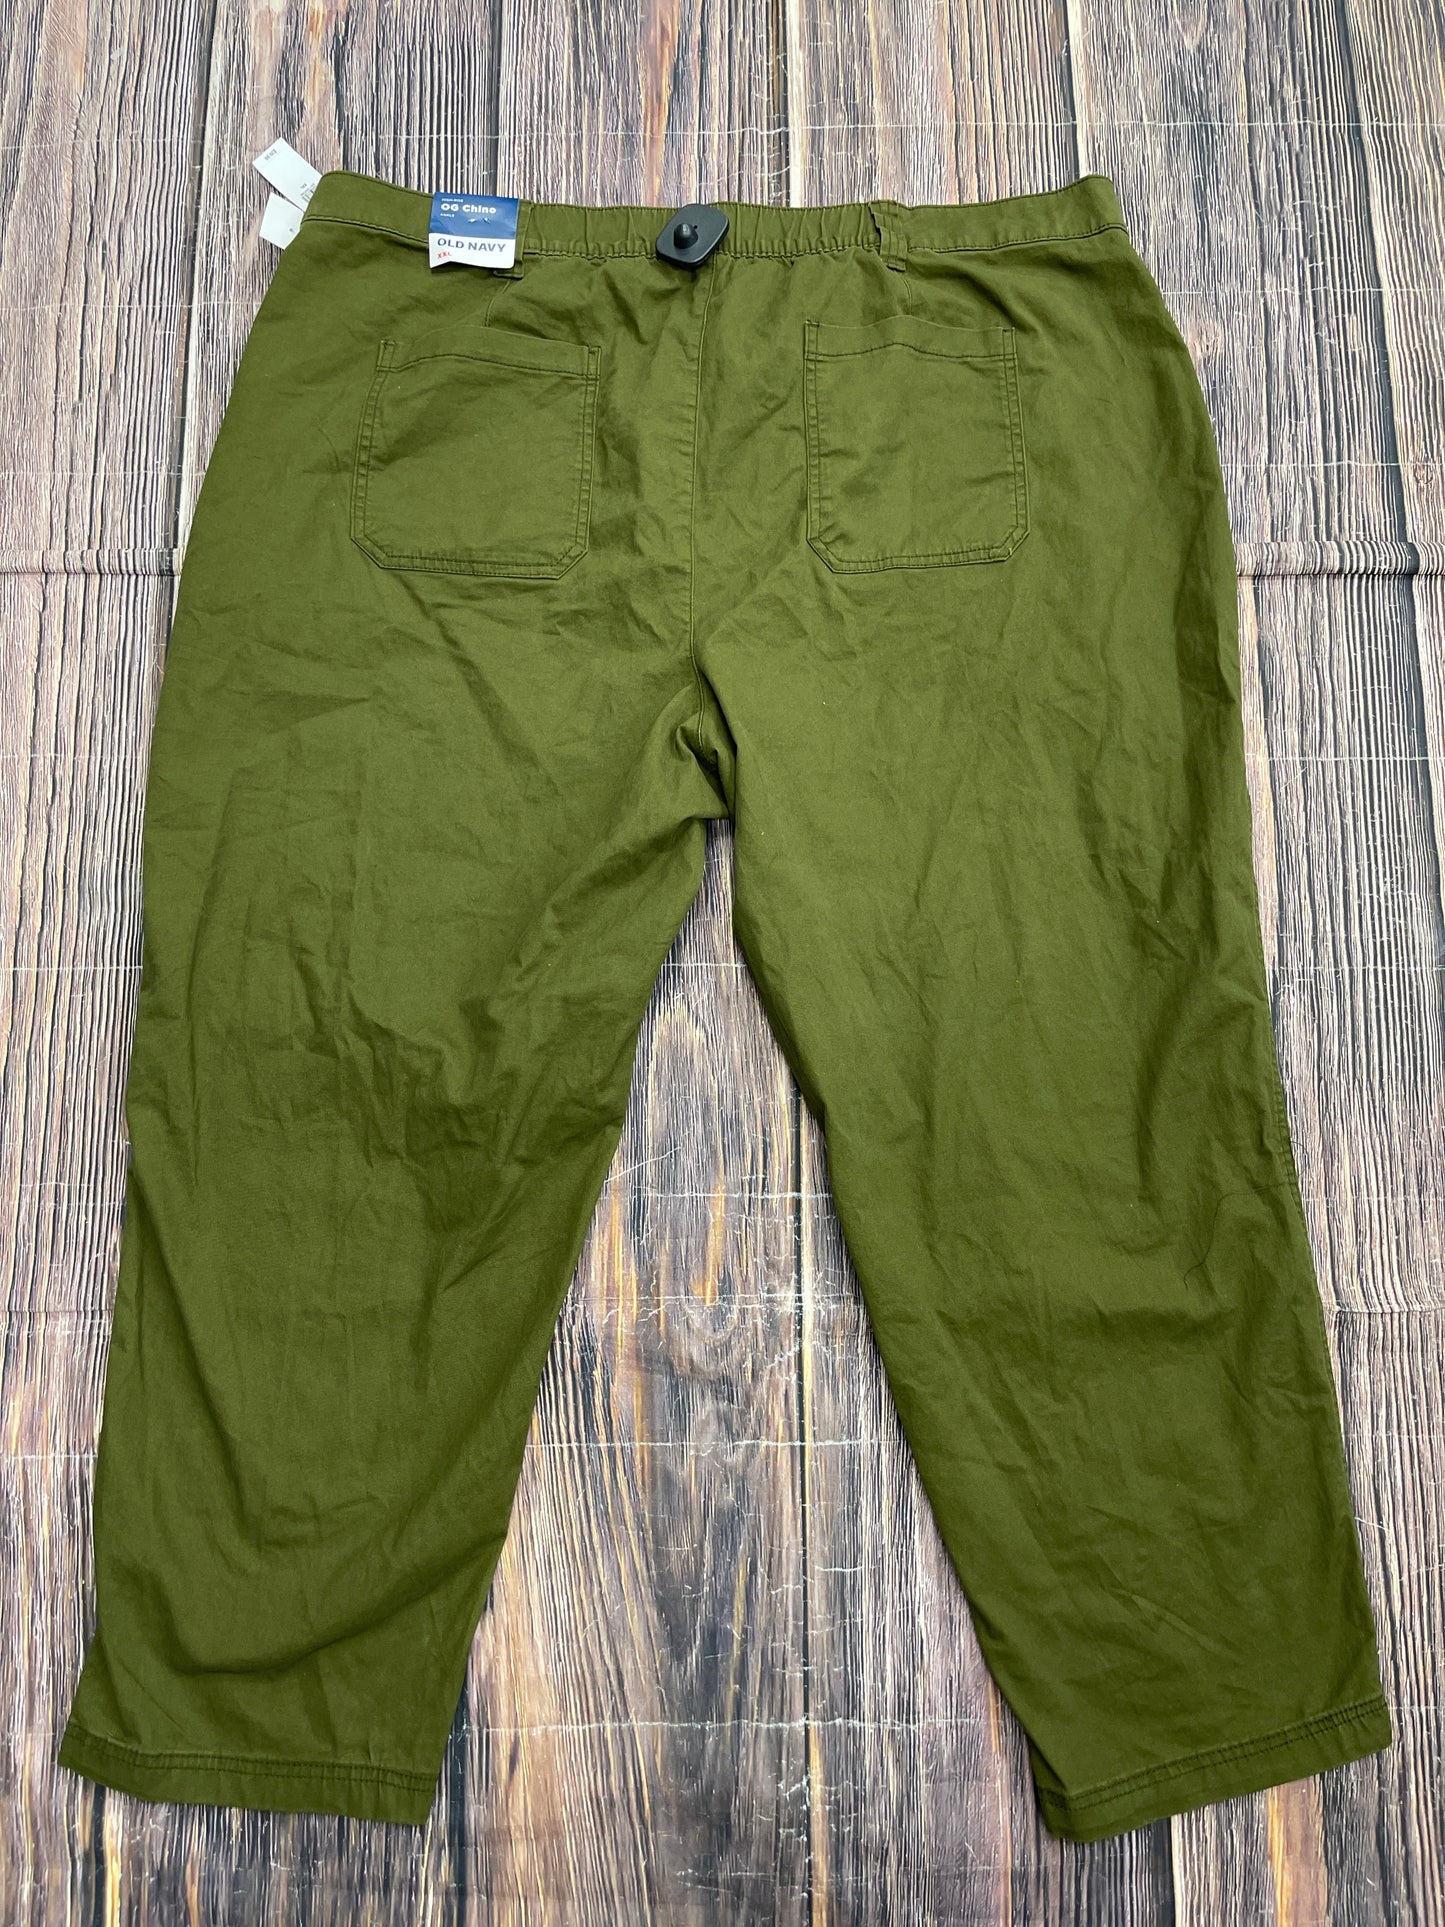 Pants Cargo & Utility By Old Navy  Size: 1x